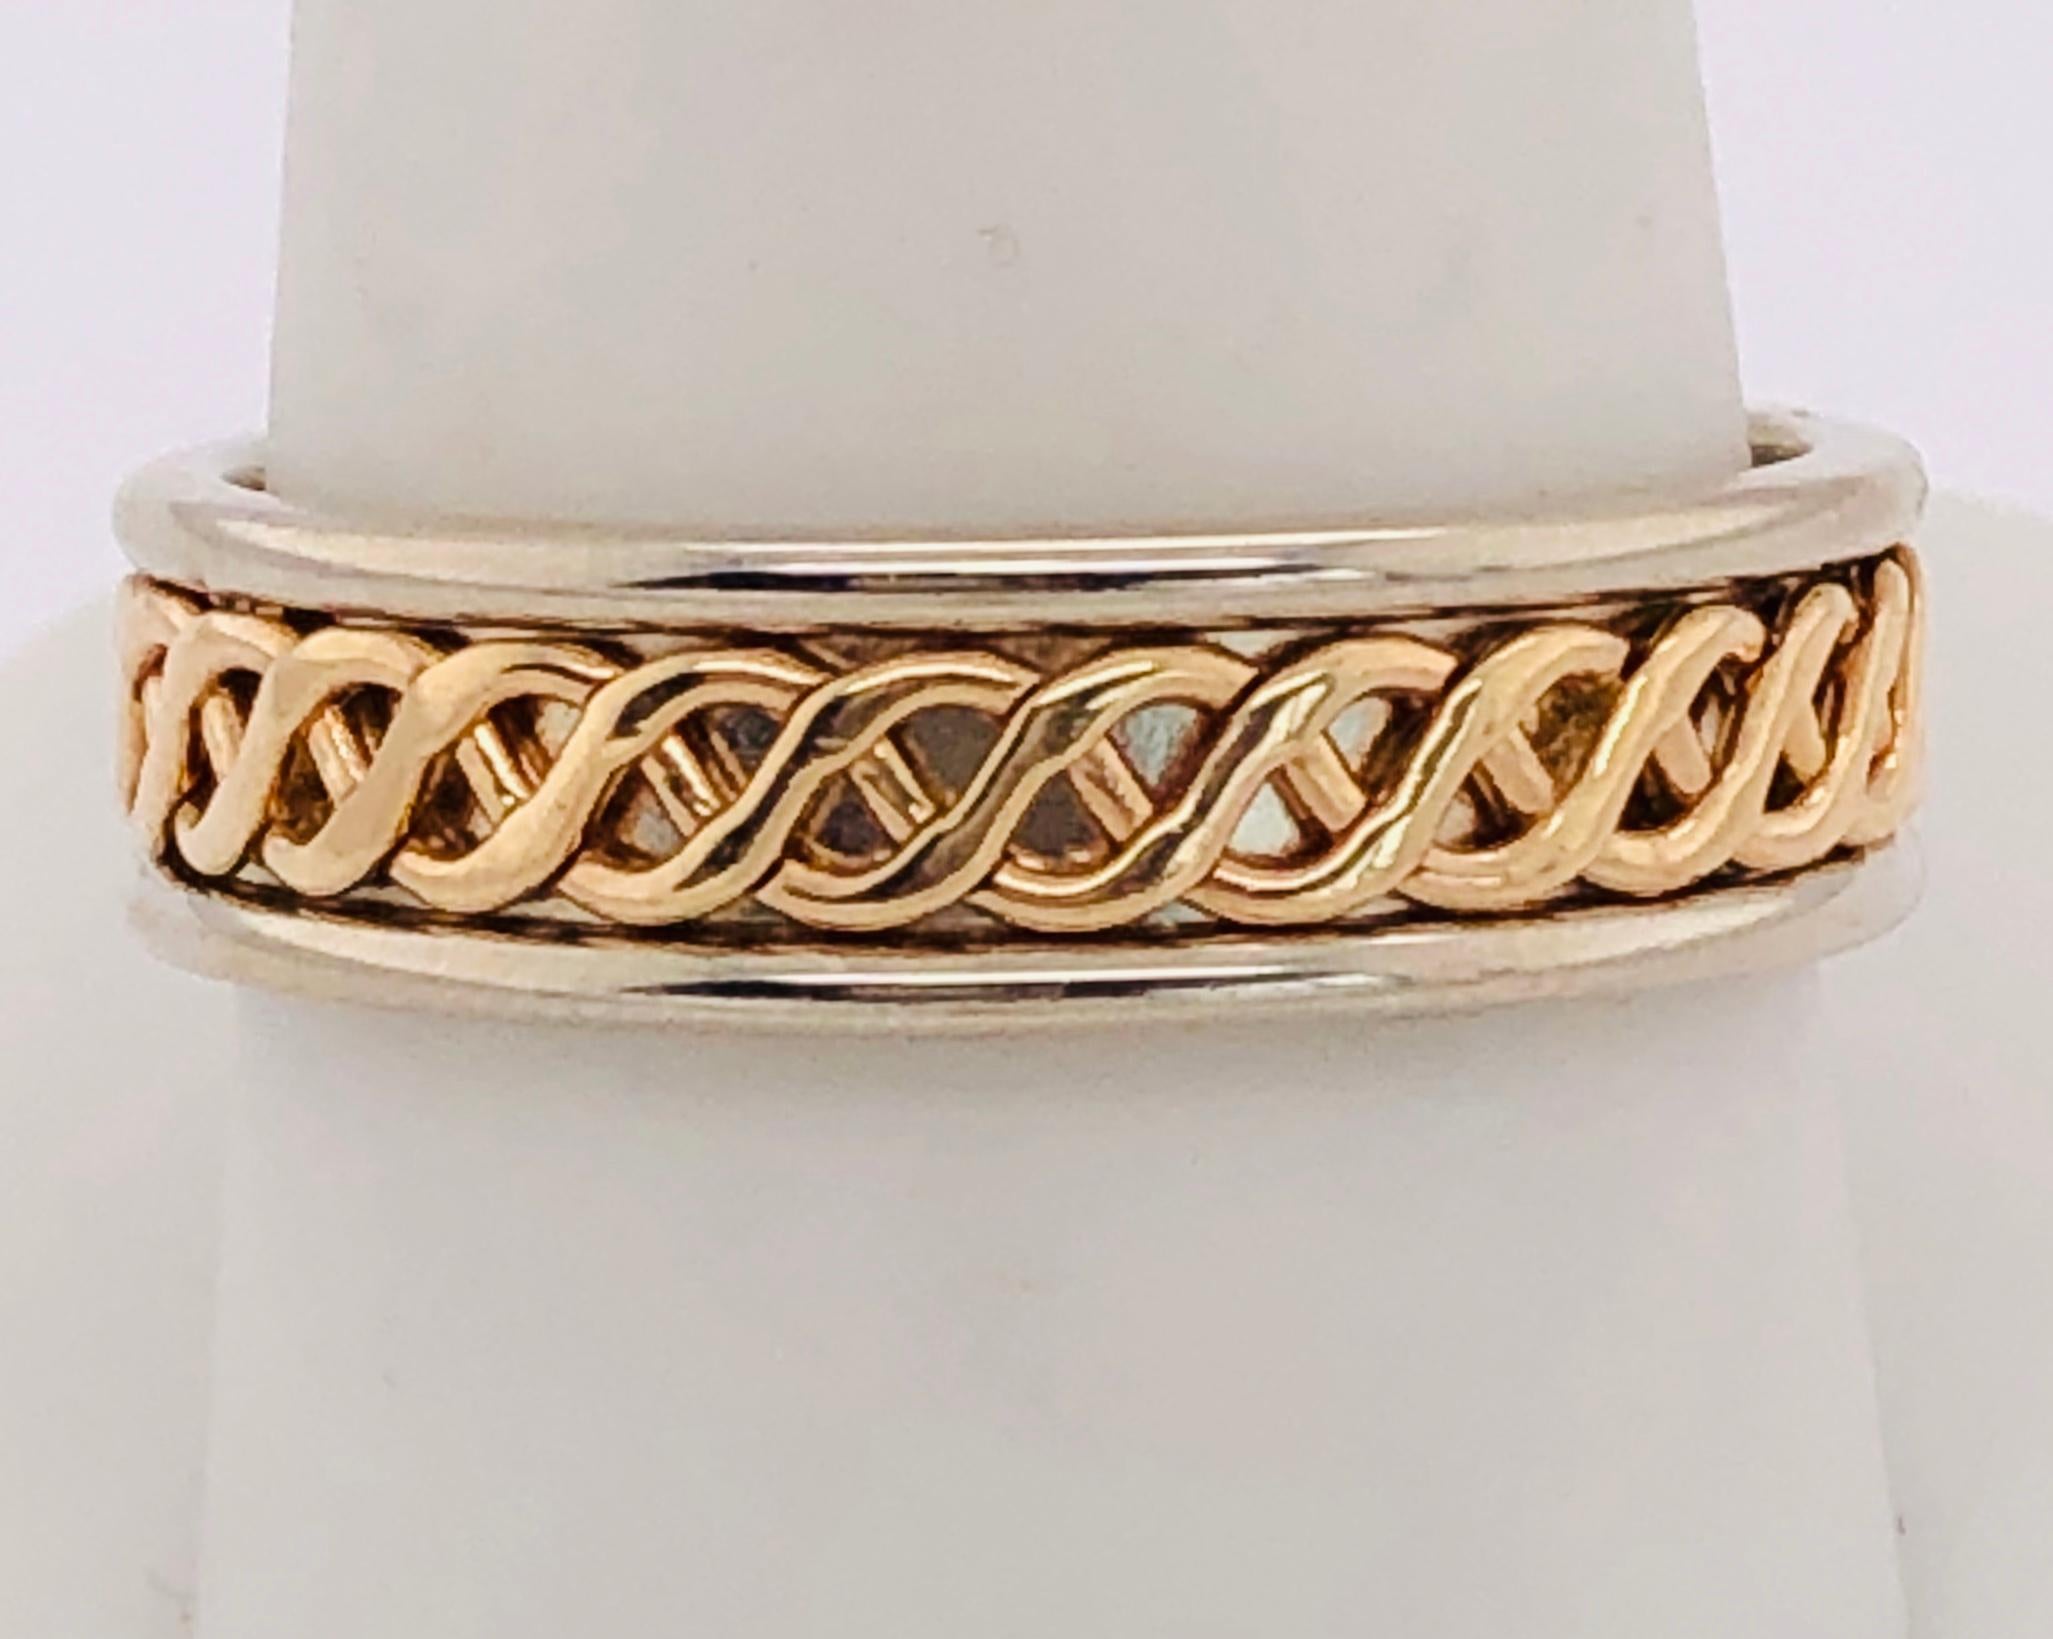 14Kt Two Tone Band Ring/Bridal Ring
Size 10 with 6.50 grams total weight
Change the tag to 228